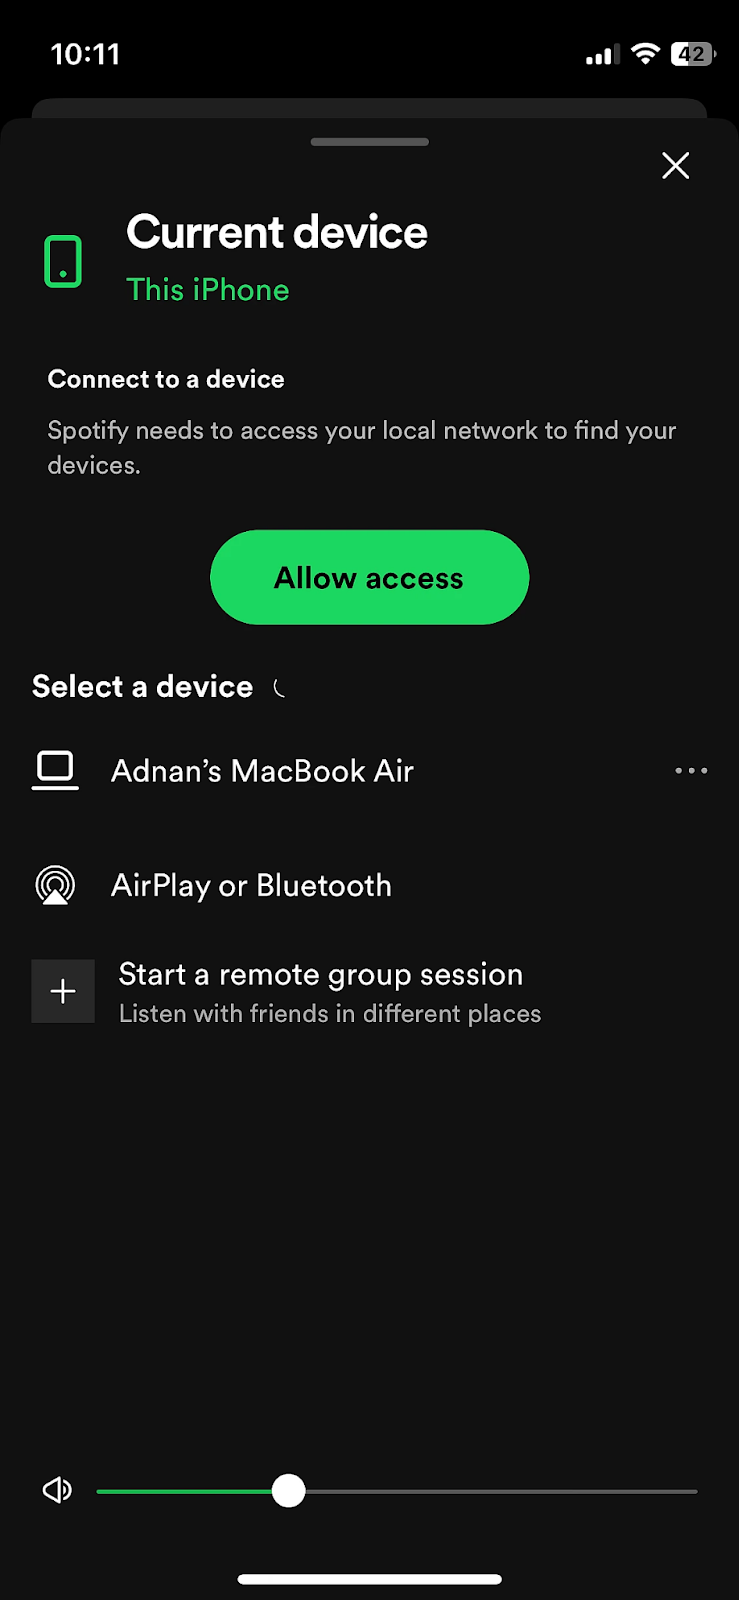 Spotify DJ Not Showing Up: What Are the Reasons & How to Fix It?